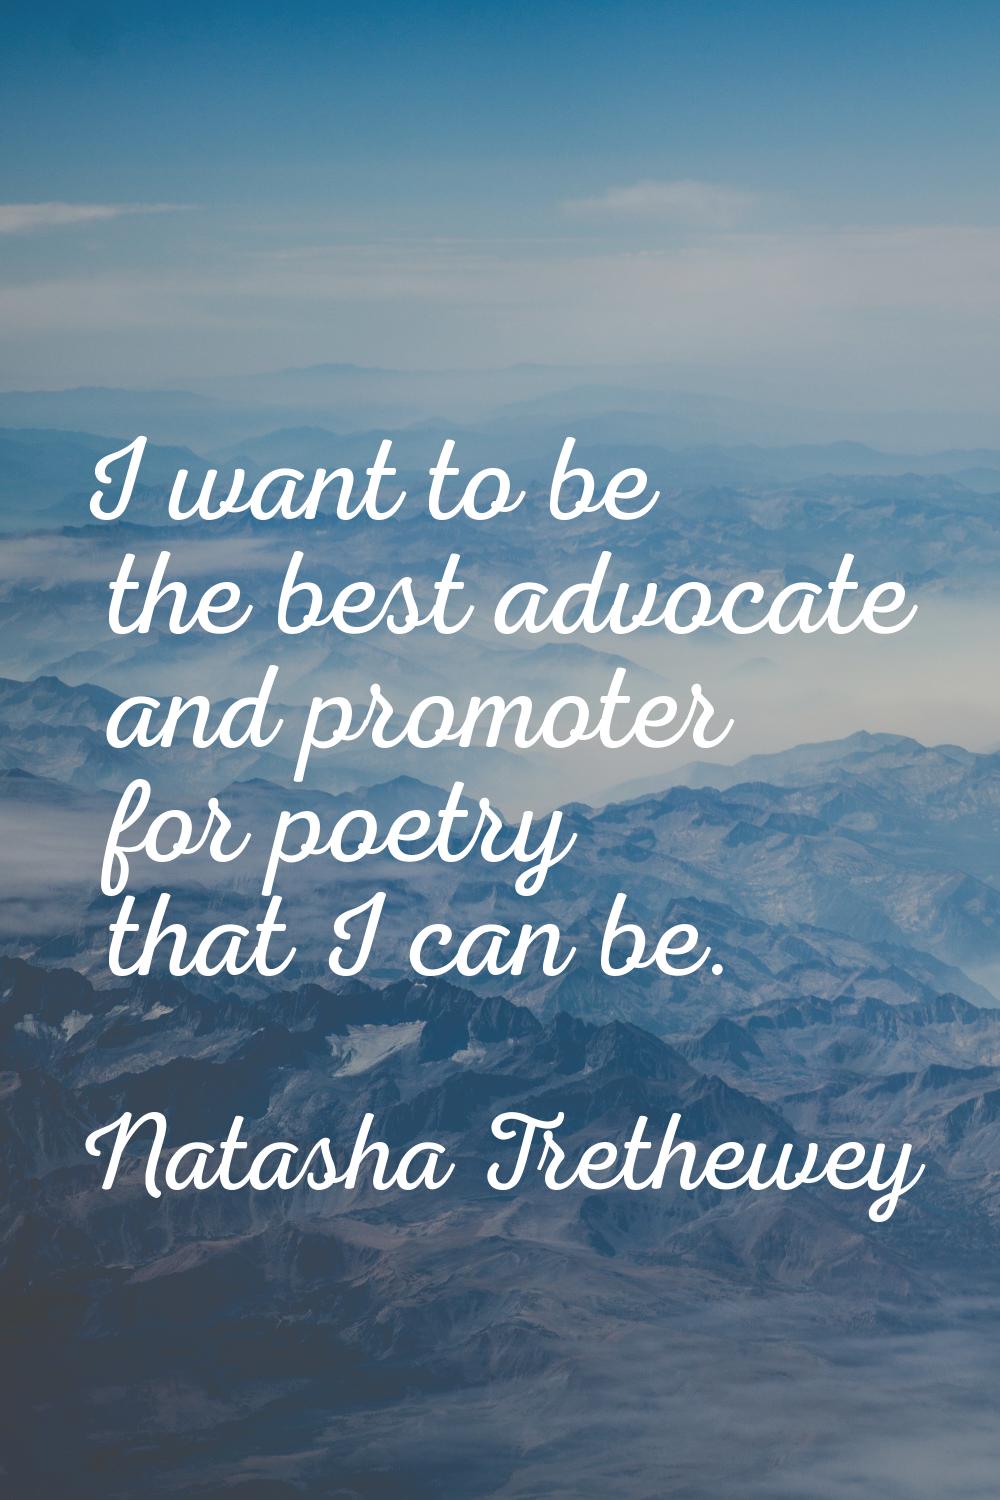 I want to be the best advocate and promoter for poetry that I can be.